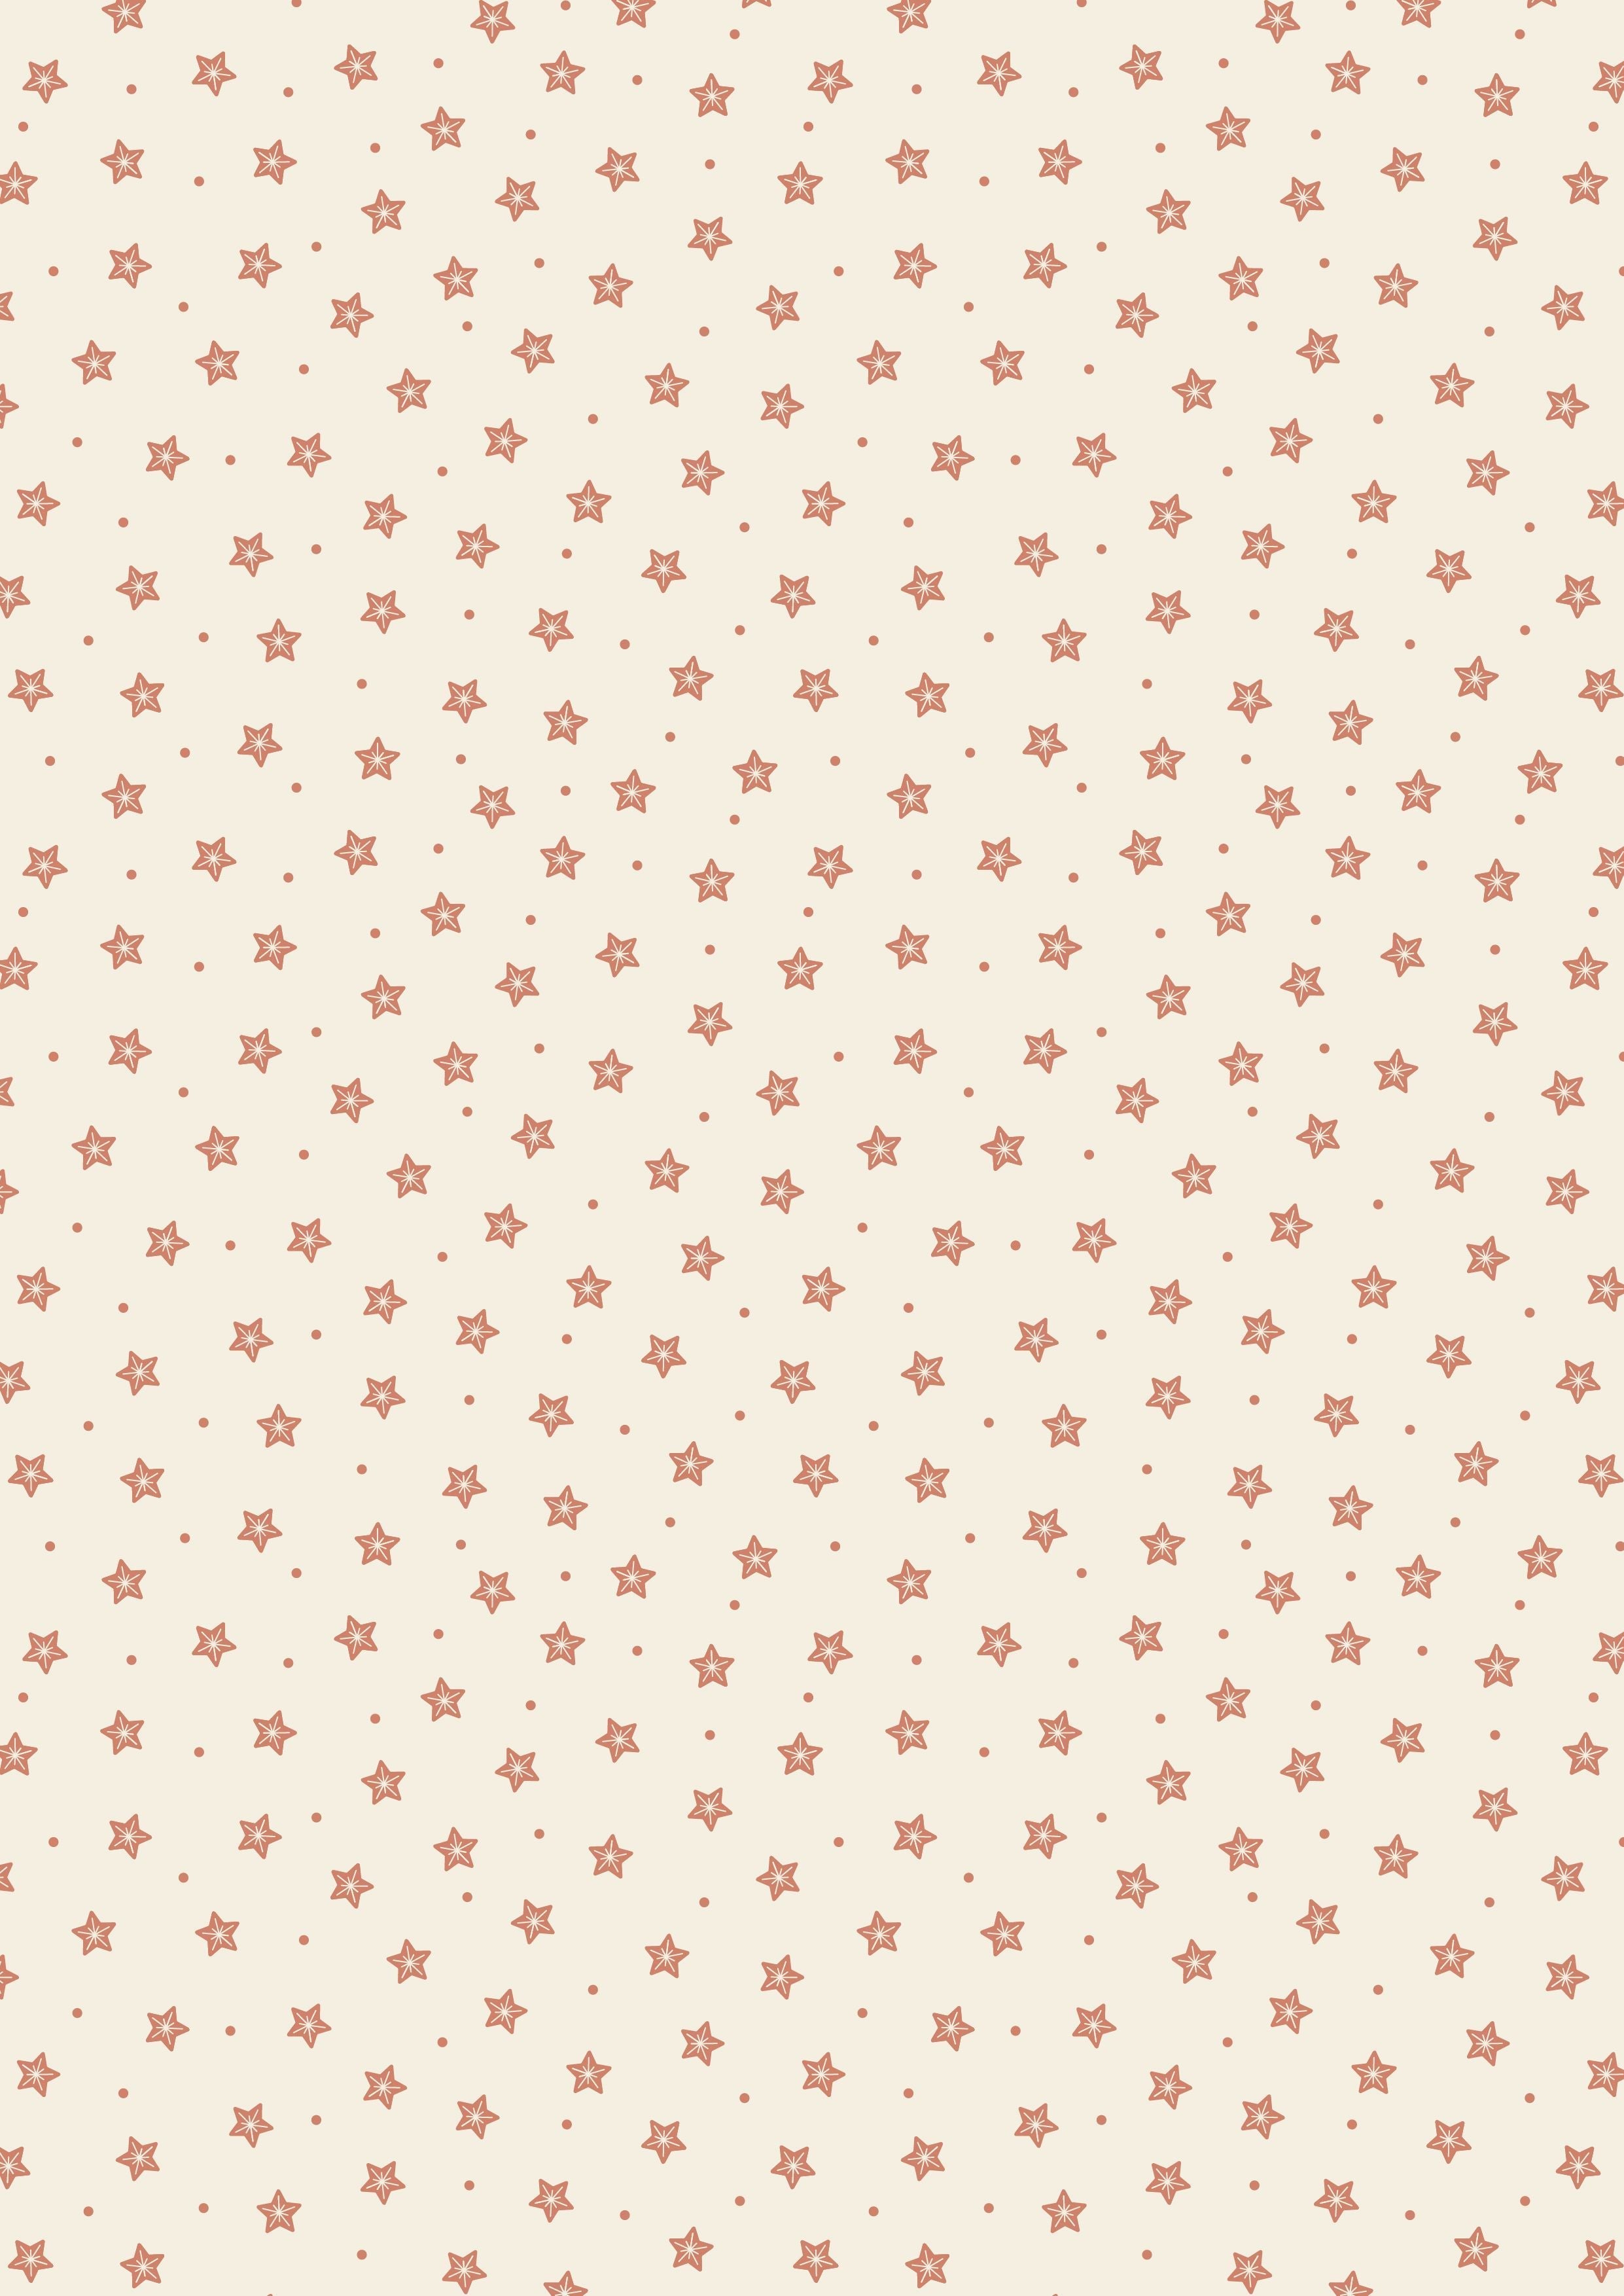 A cream fabric with red stars and tiny red dots - Gingerbread Season by Lewis & Irene